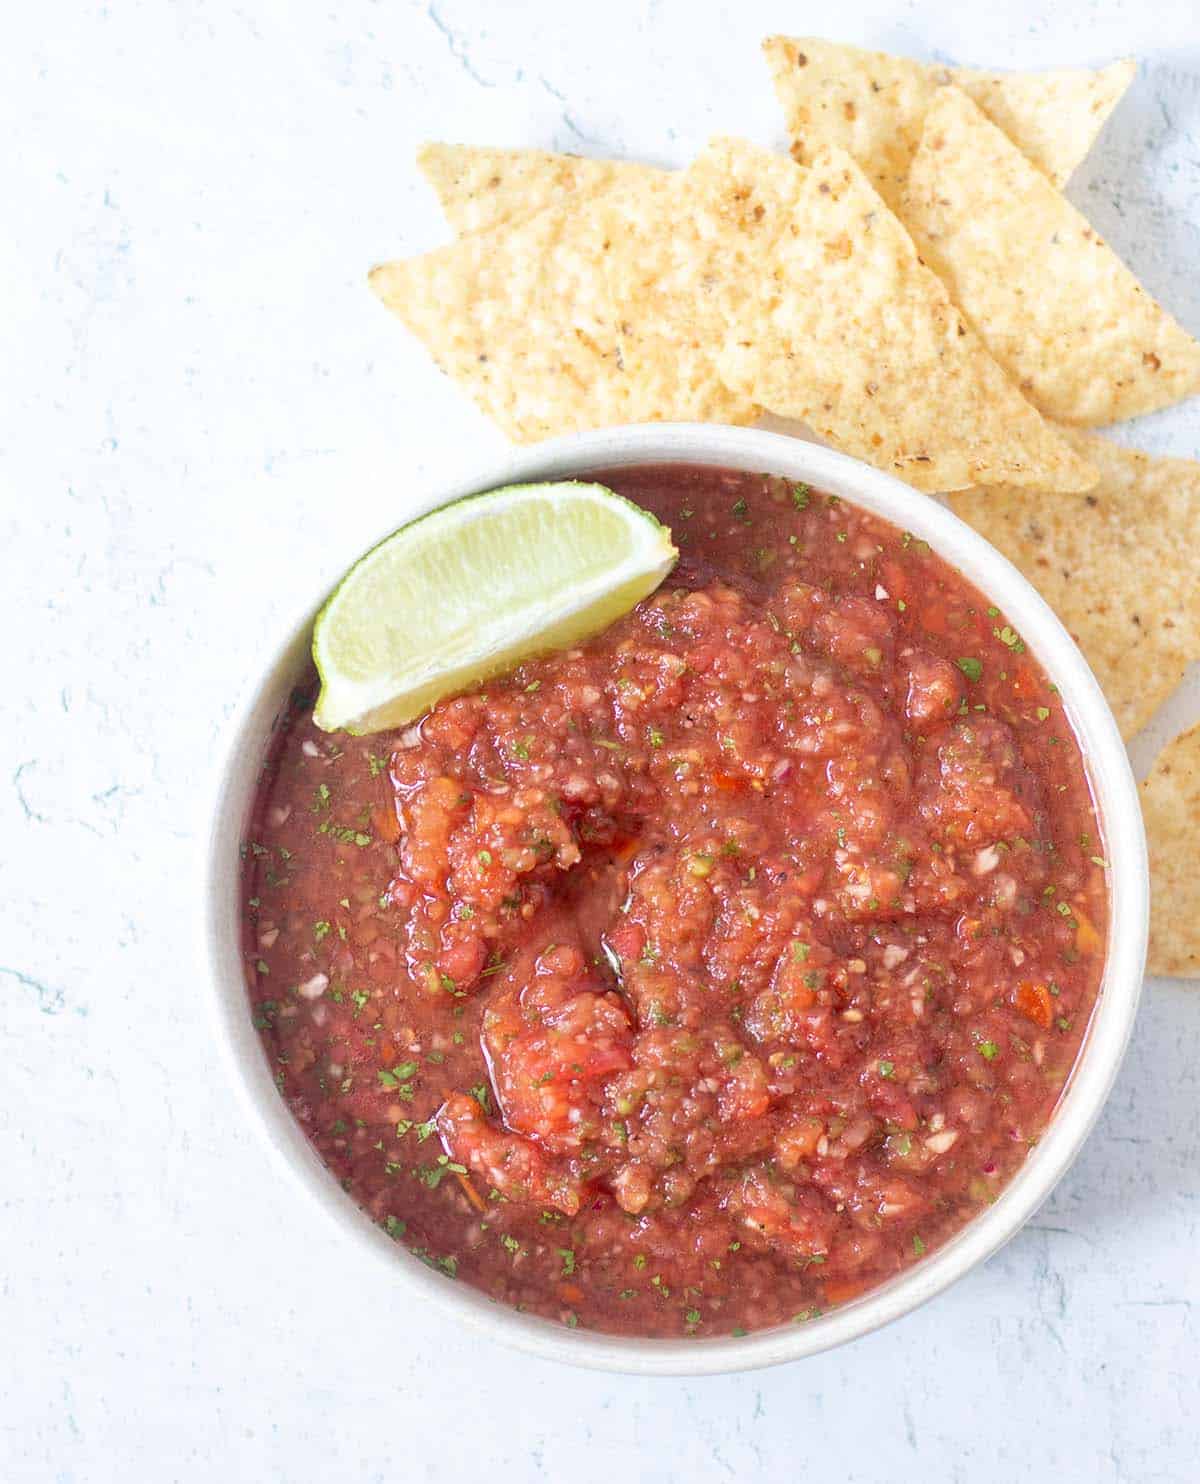 Homemade salsa in a white bowl with a lime wedge and tortilla chips beside the bowl.